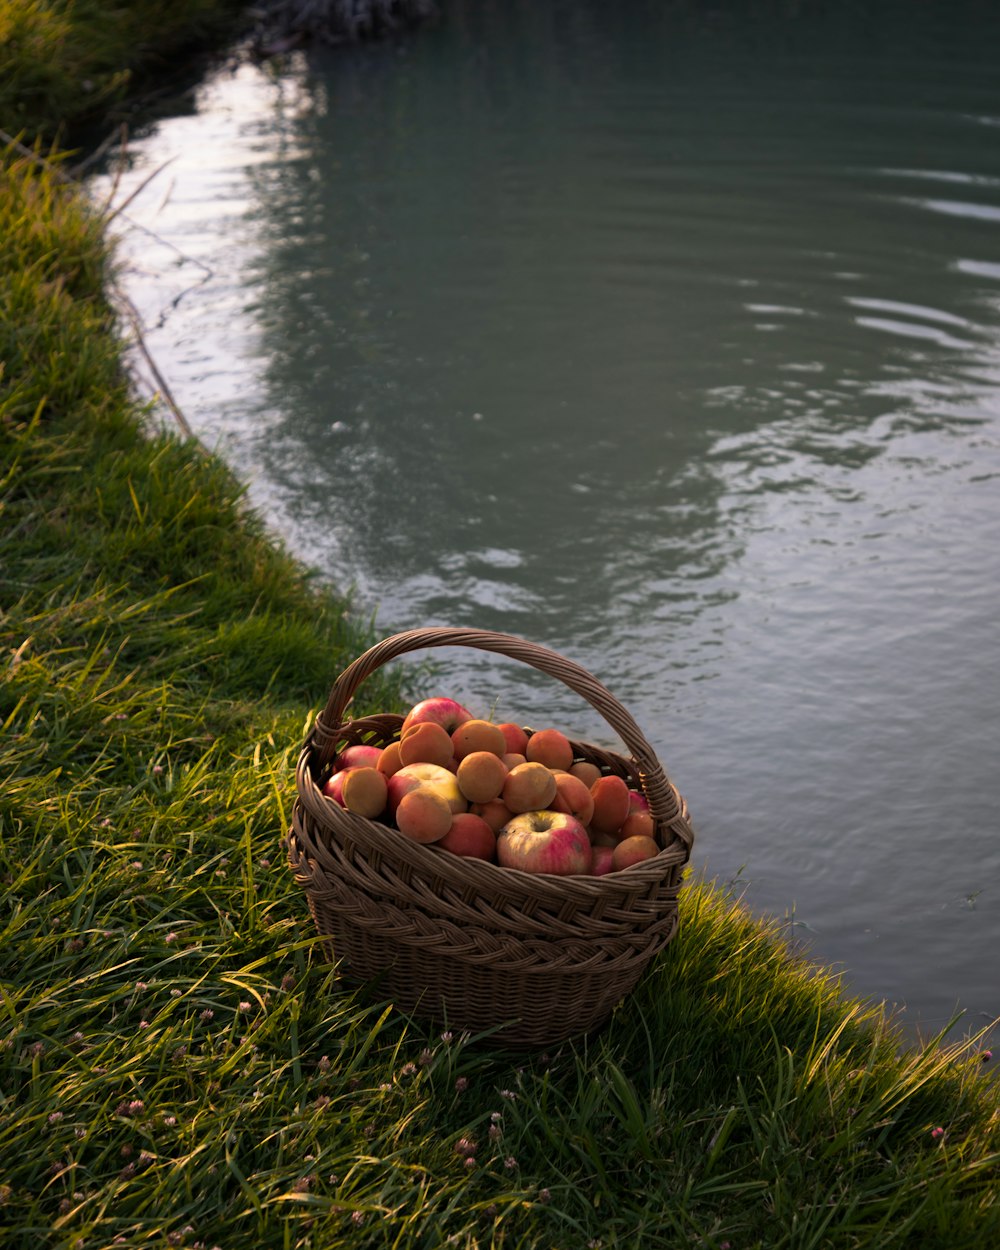 a basket of apples sitting on the grass next to a body of water